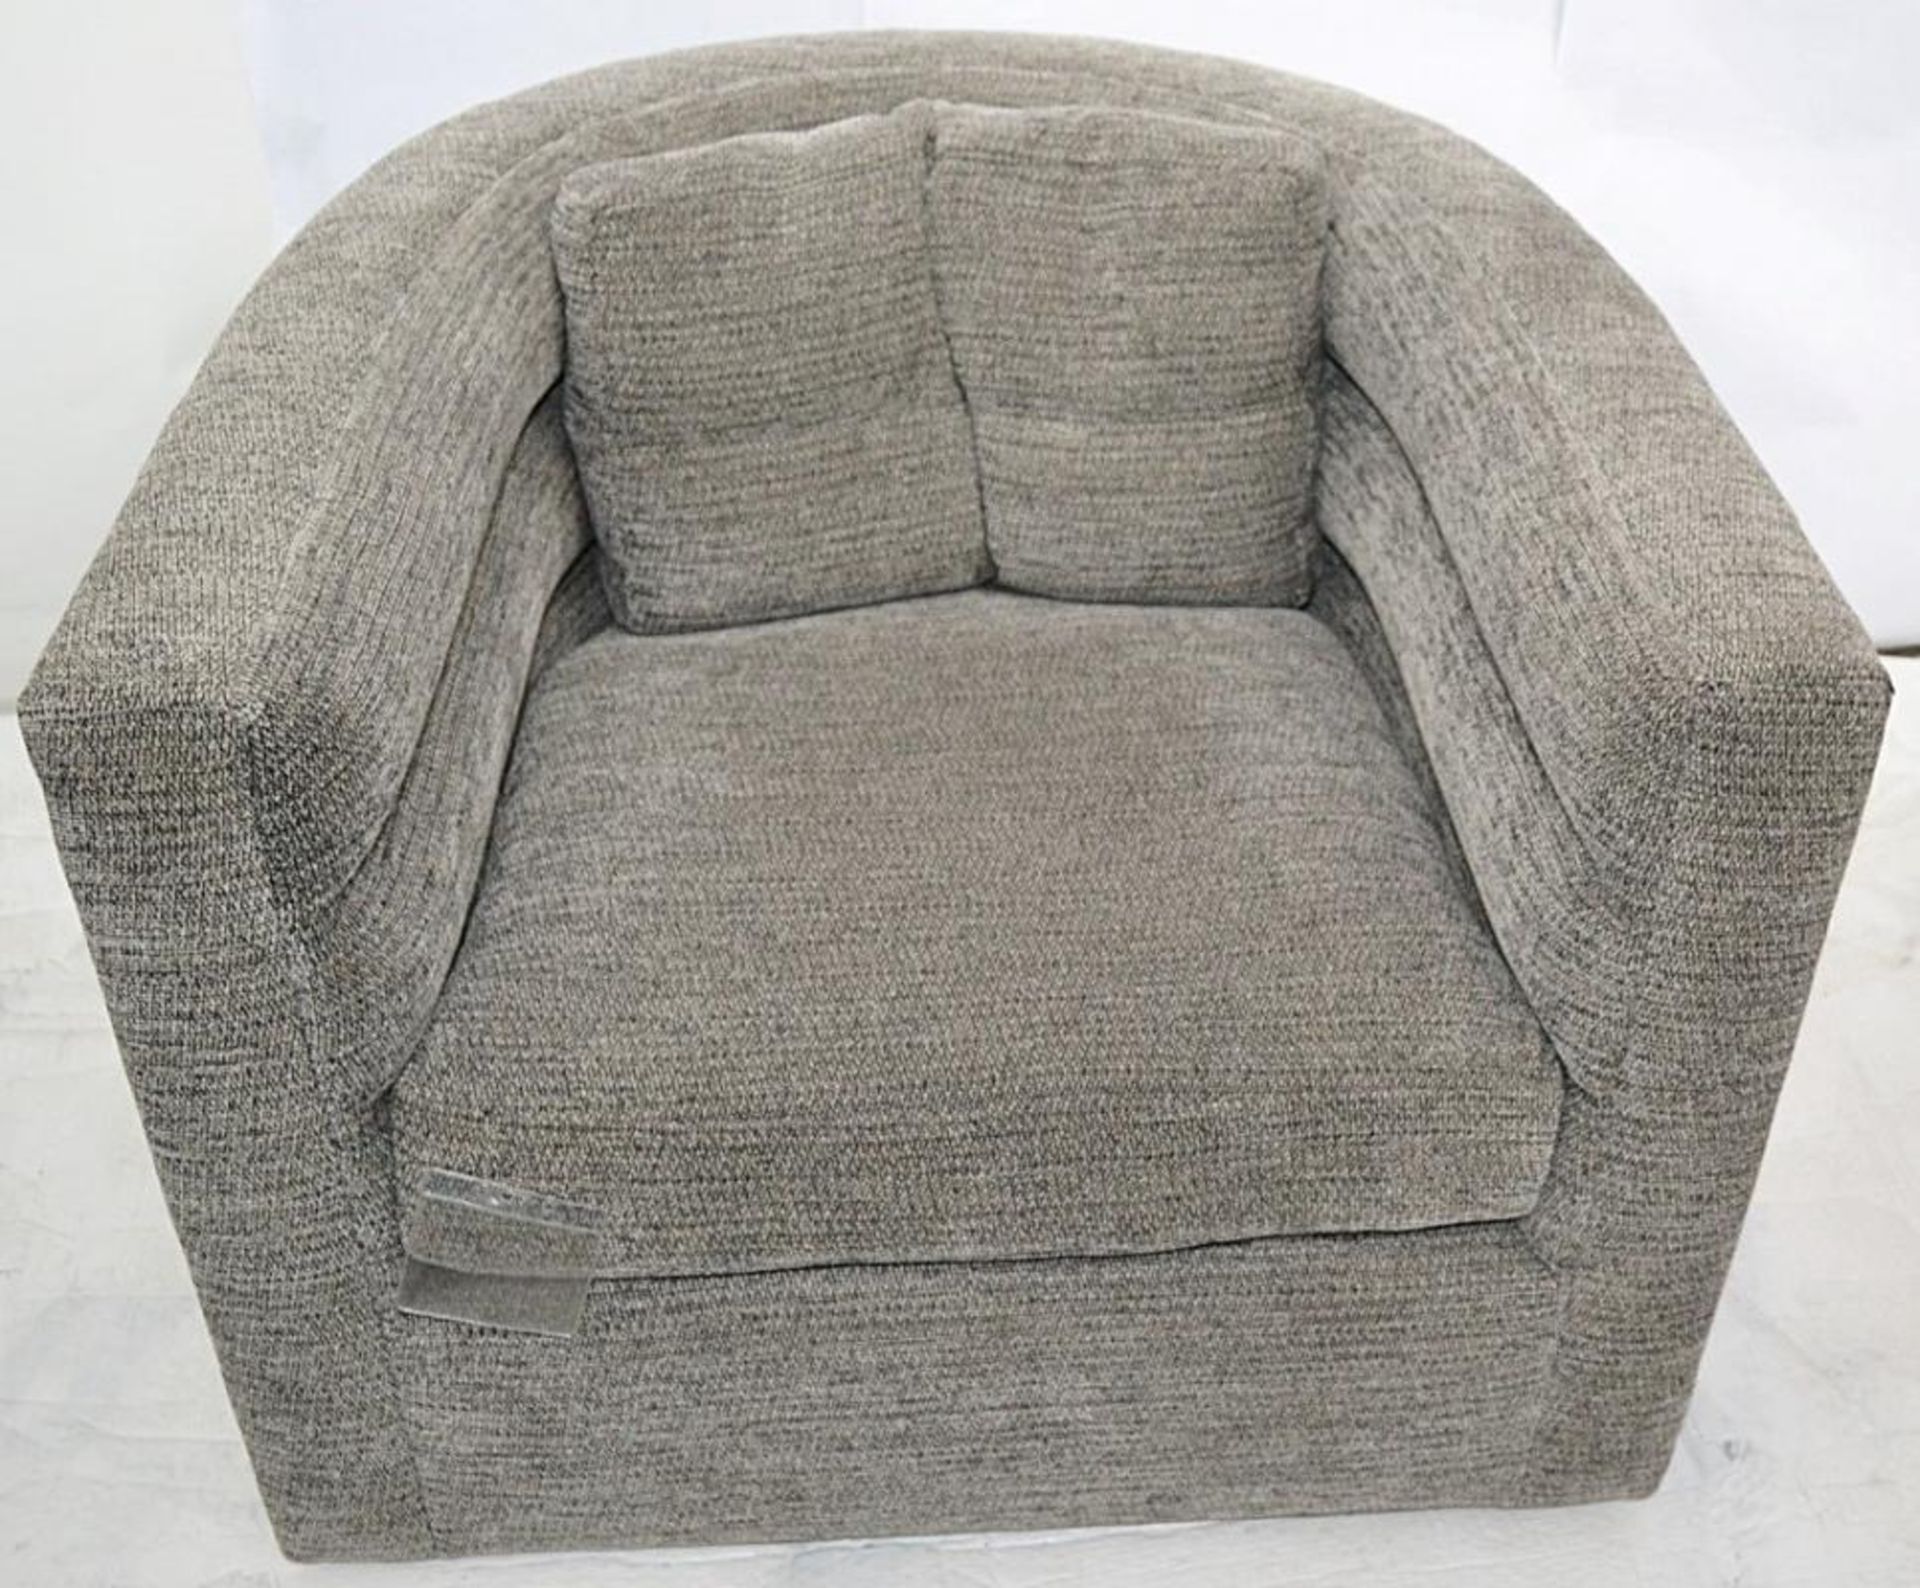 1 x KELLY WEARSTLER Melrose Club Chair In Grey - Dimensions: W36" x D38" x H28" - Ref: 5223289 - CL0 - Image 3 of 24